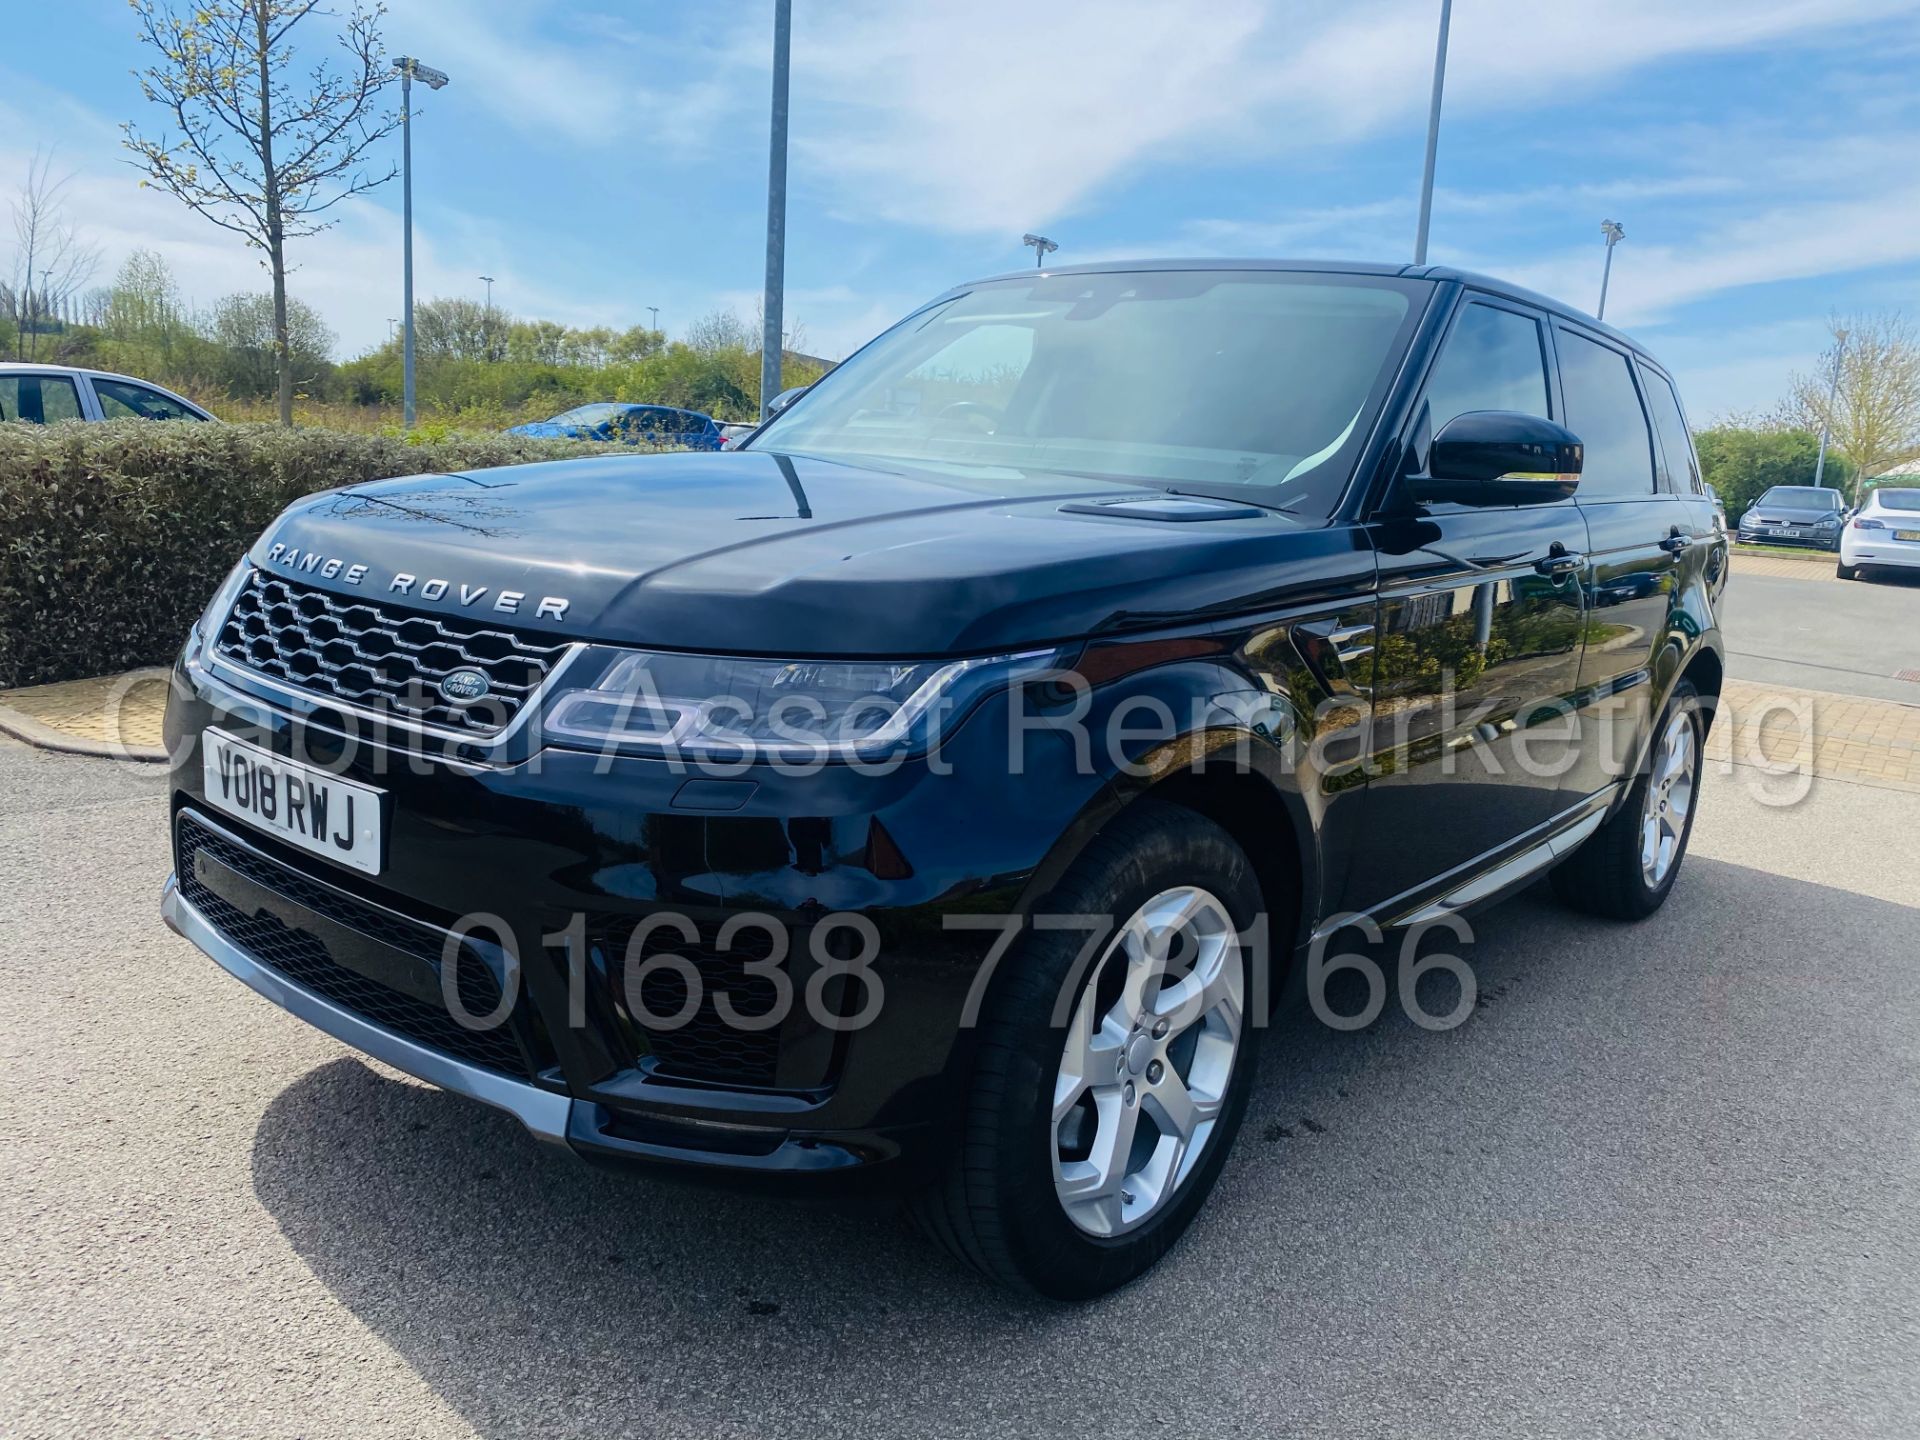 RANGE ROVER SPORT *HSE EDITION* SUV (2018 - NEW MODEL) '8 SPEED AUTO - LEATHER - NAV' *FULLY LOADED* - Image 2 of 56